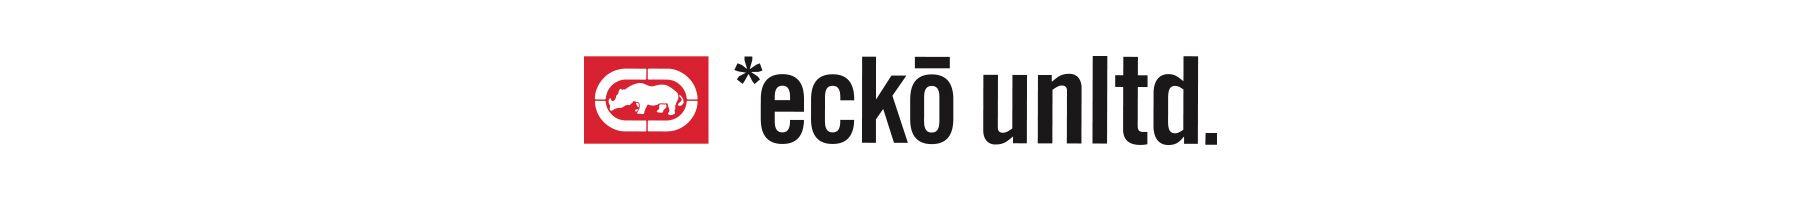 Ecko Clothing Logo - Shop & Find Men's Ecko Outlet 60%+ Off Clothing And Fashion At